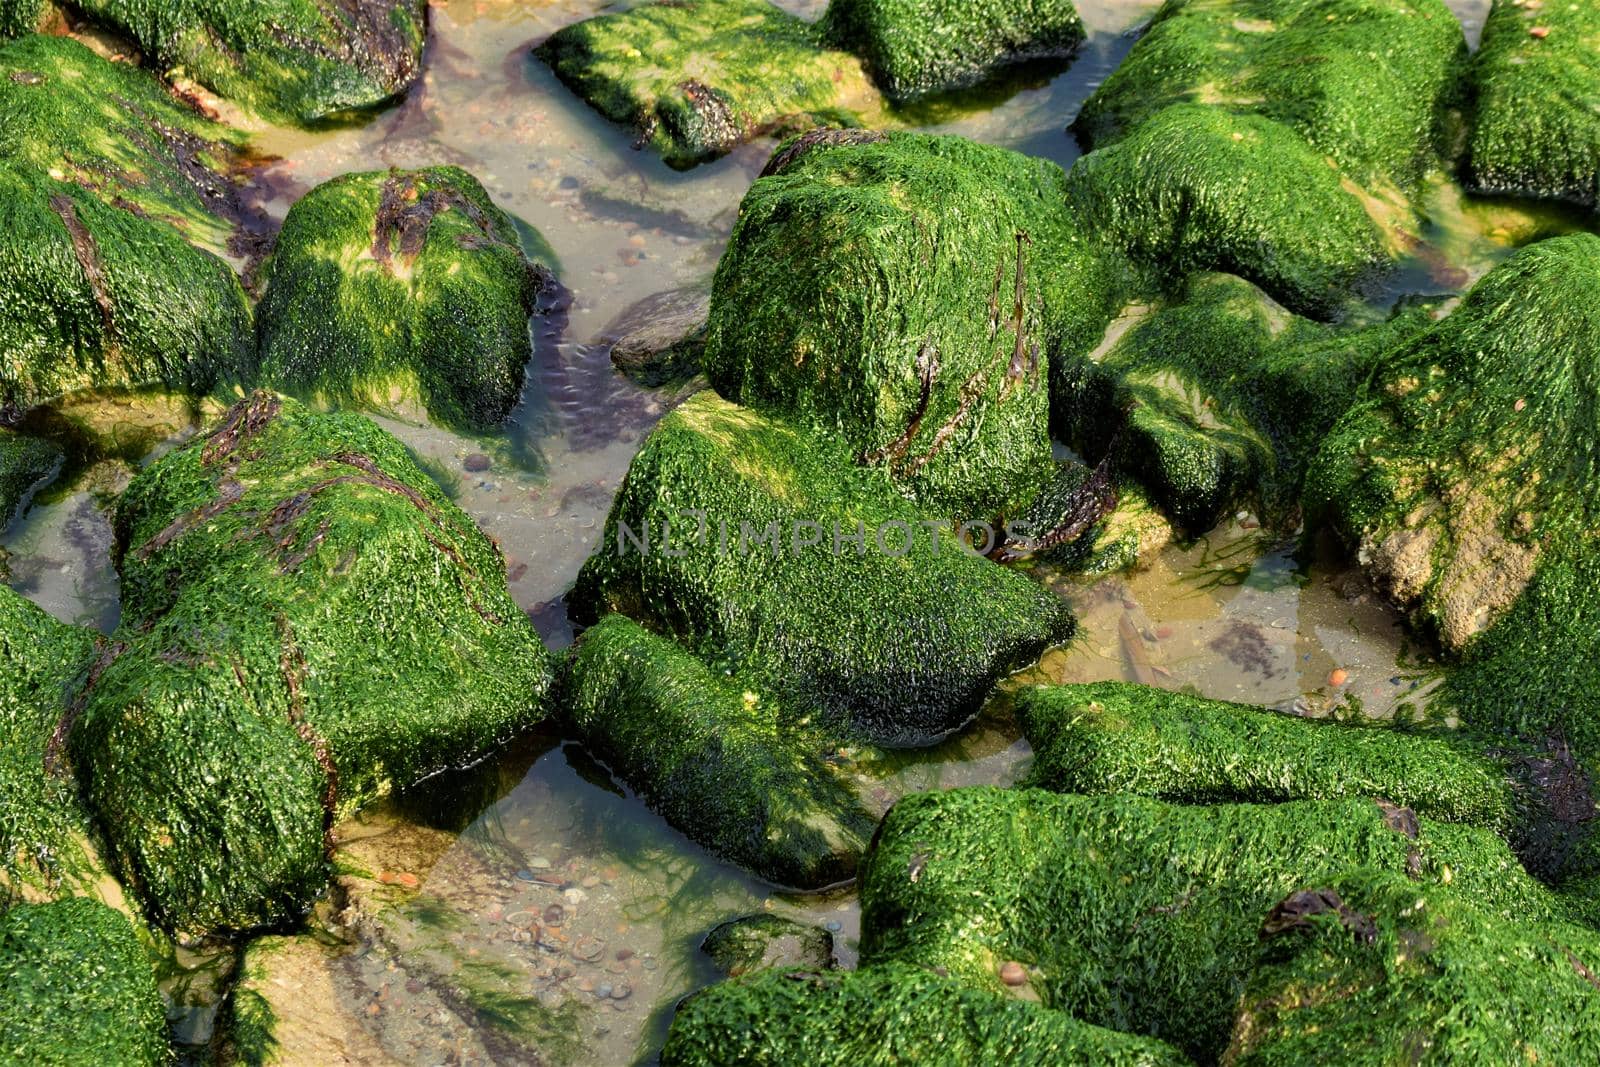 Stones overgrown with algae in the shallow water on the beach of an island